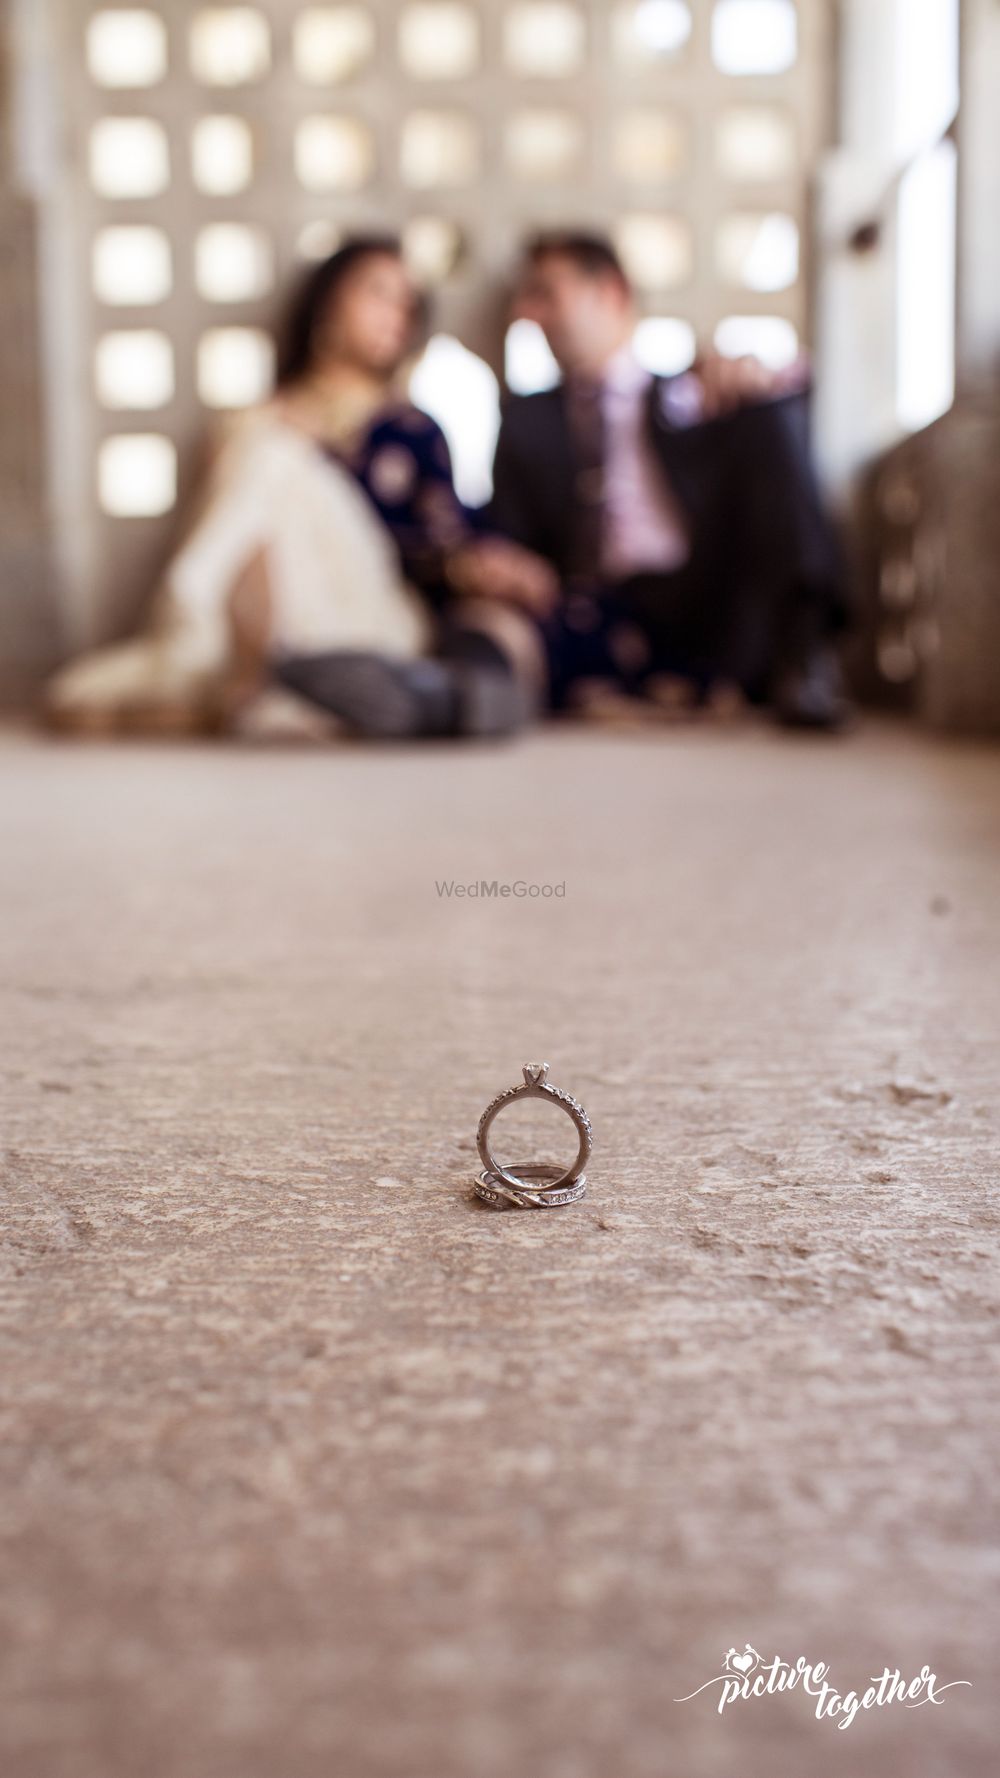 Photo of Engagement Rings in Focus with Couple Out of Focus